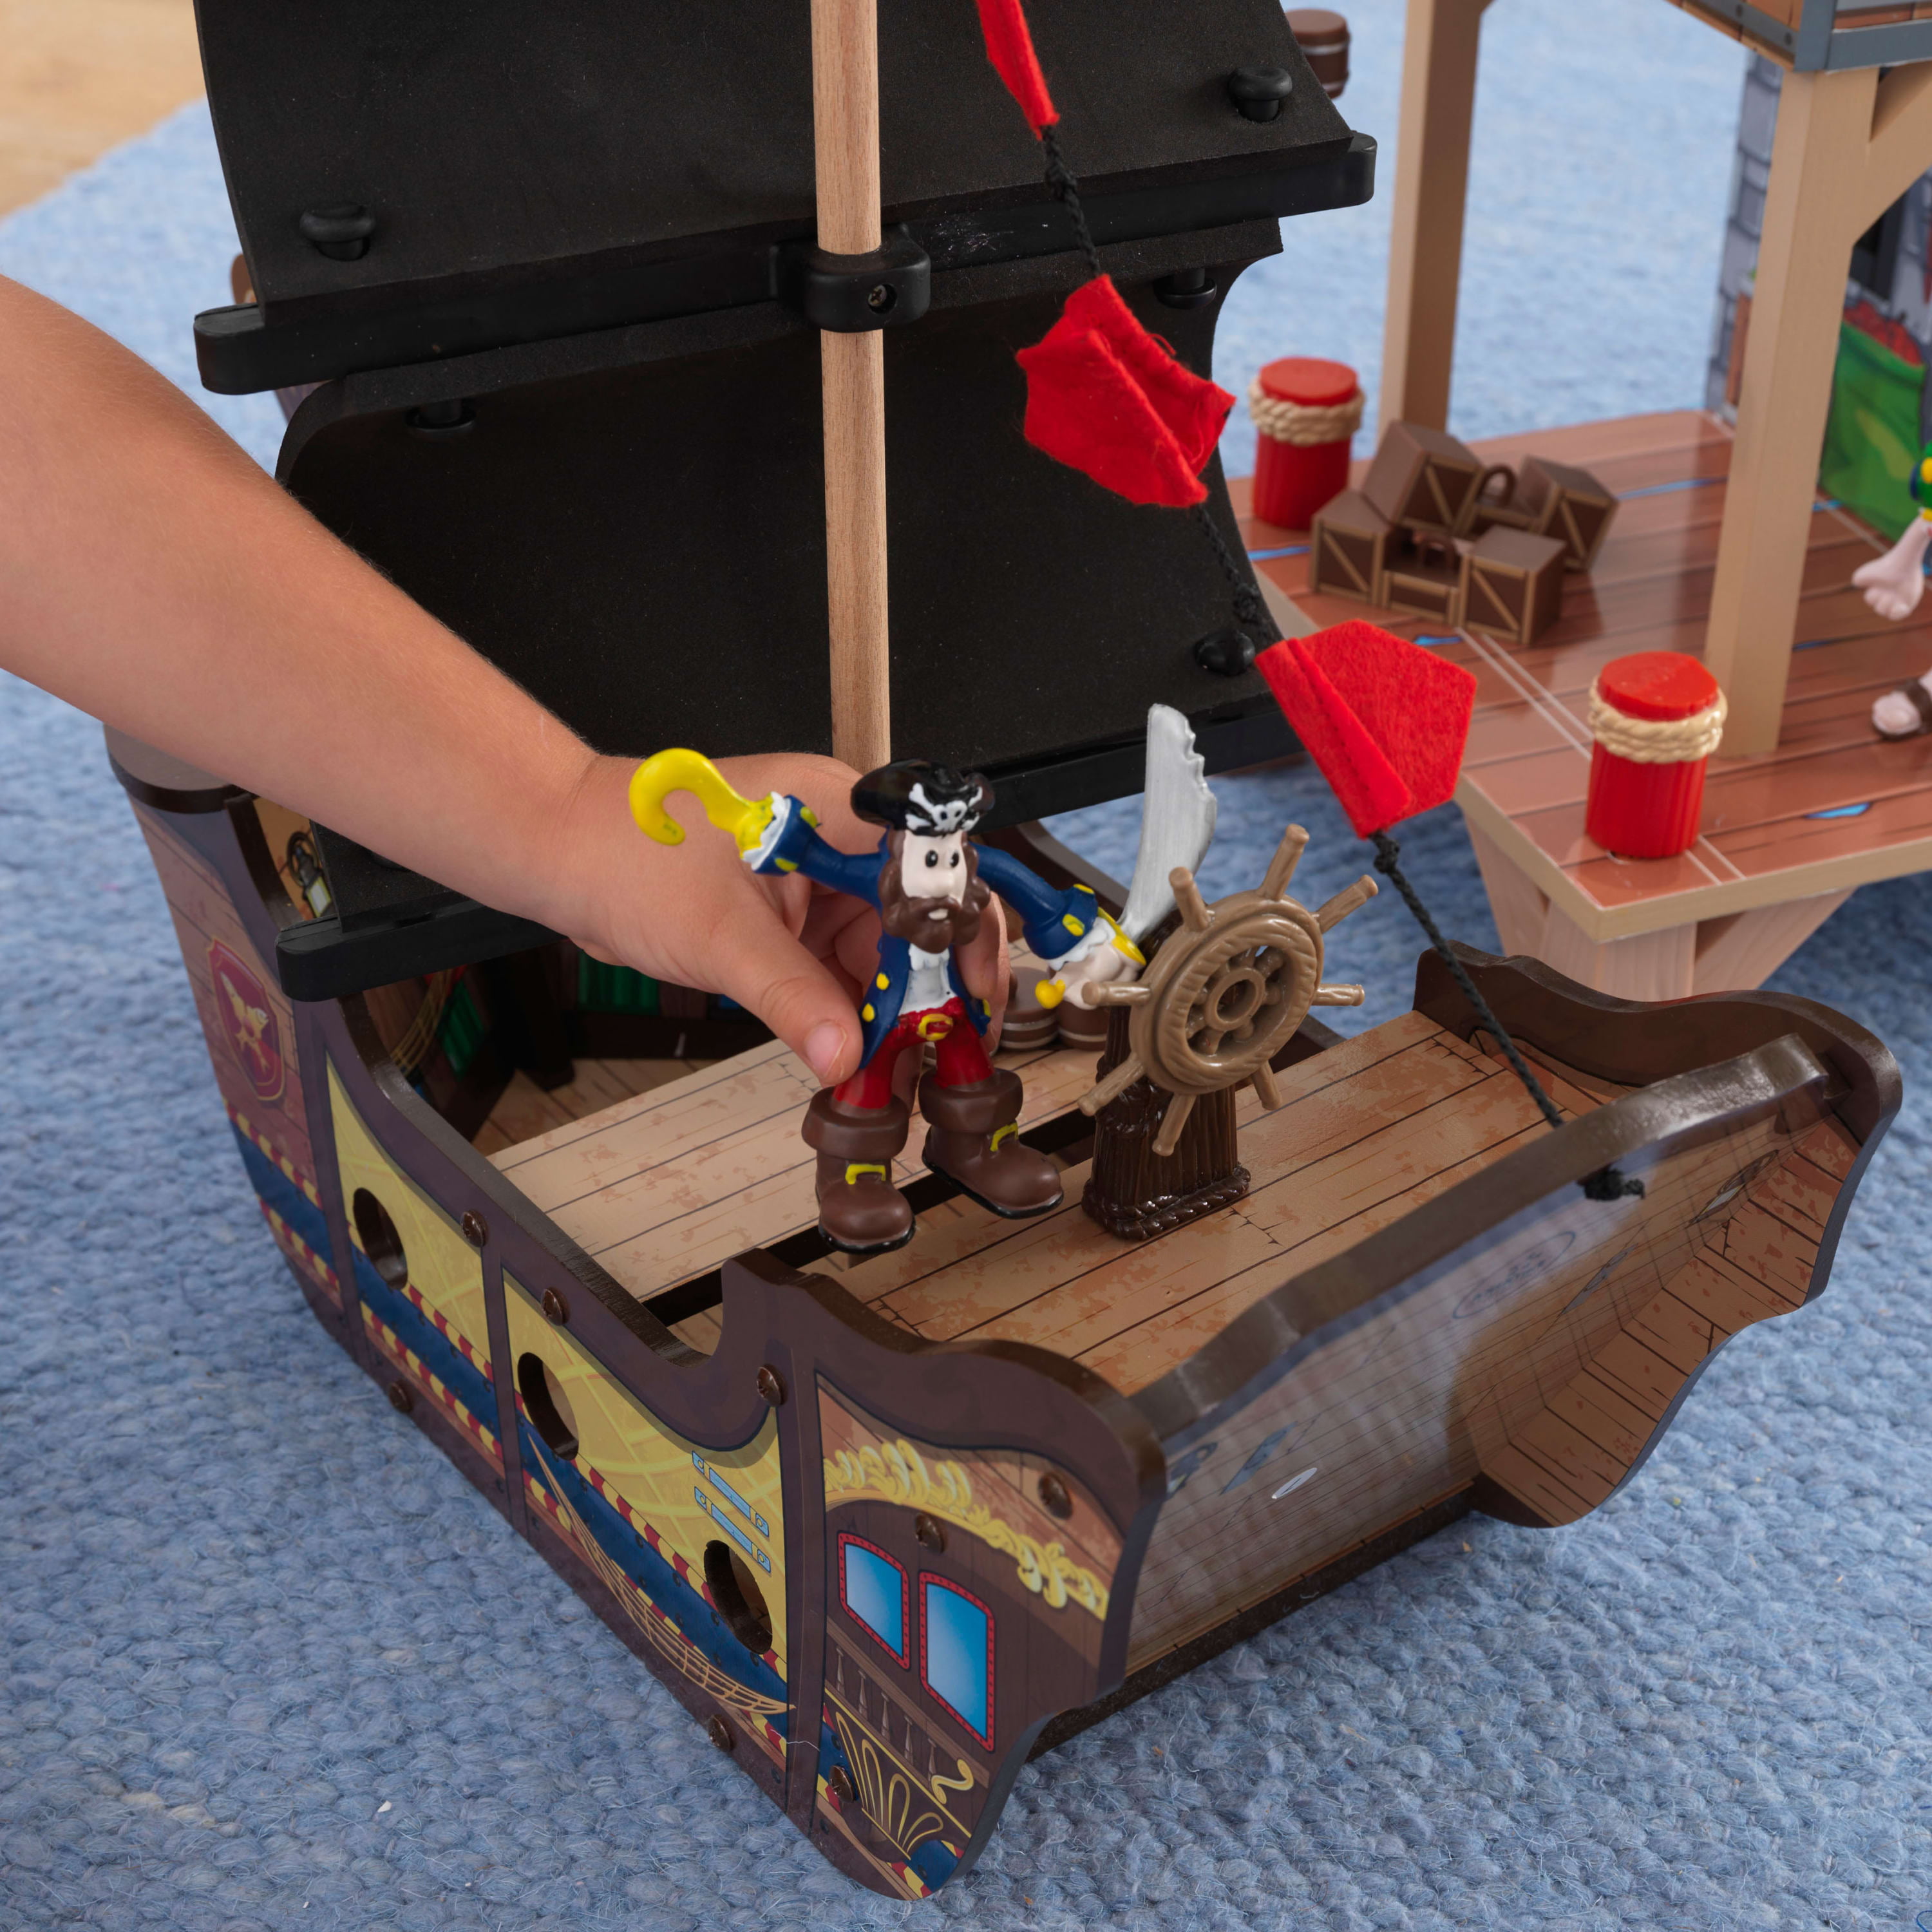  Mozlly Pirate Ship Toy Play Set with Lights and Sound